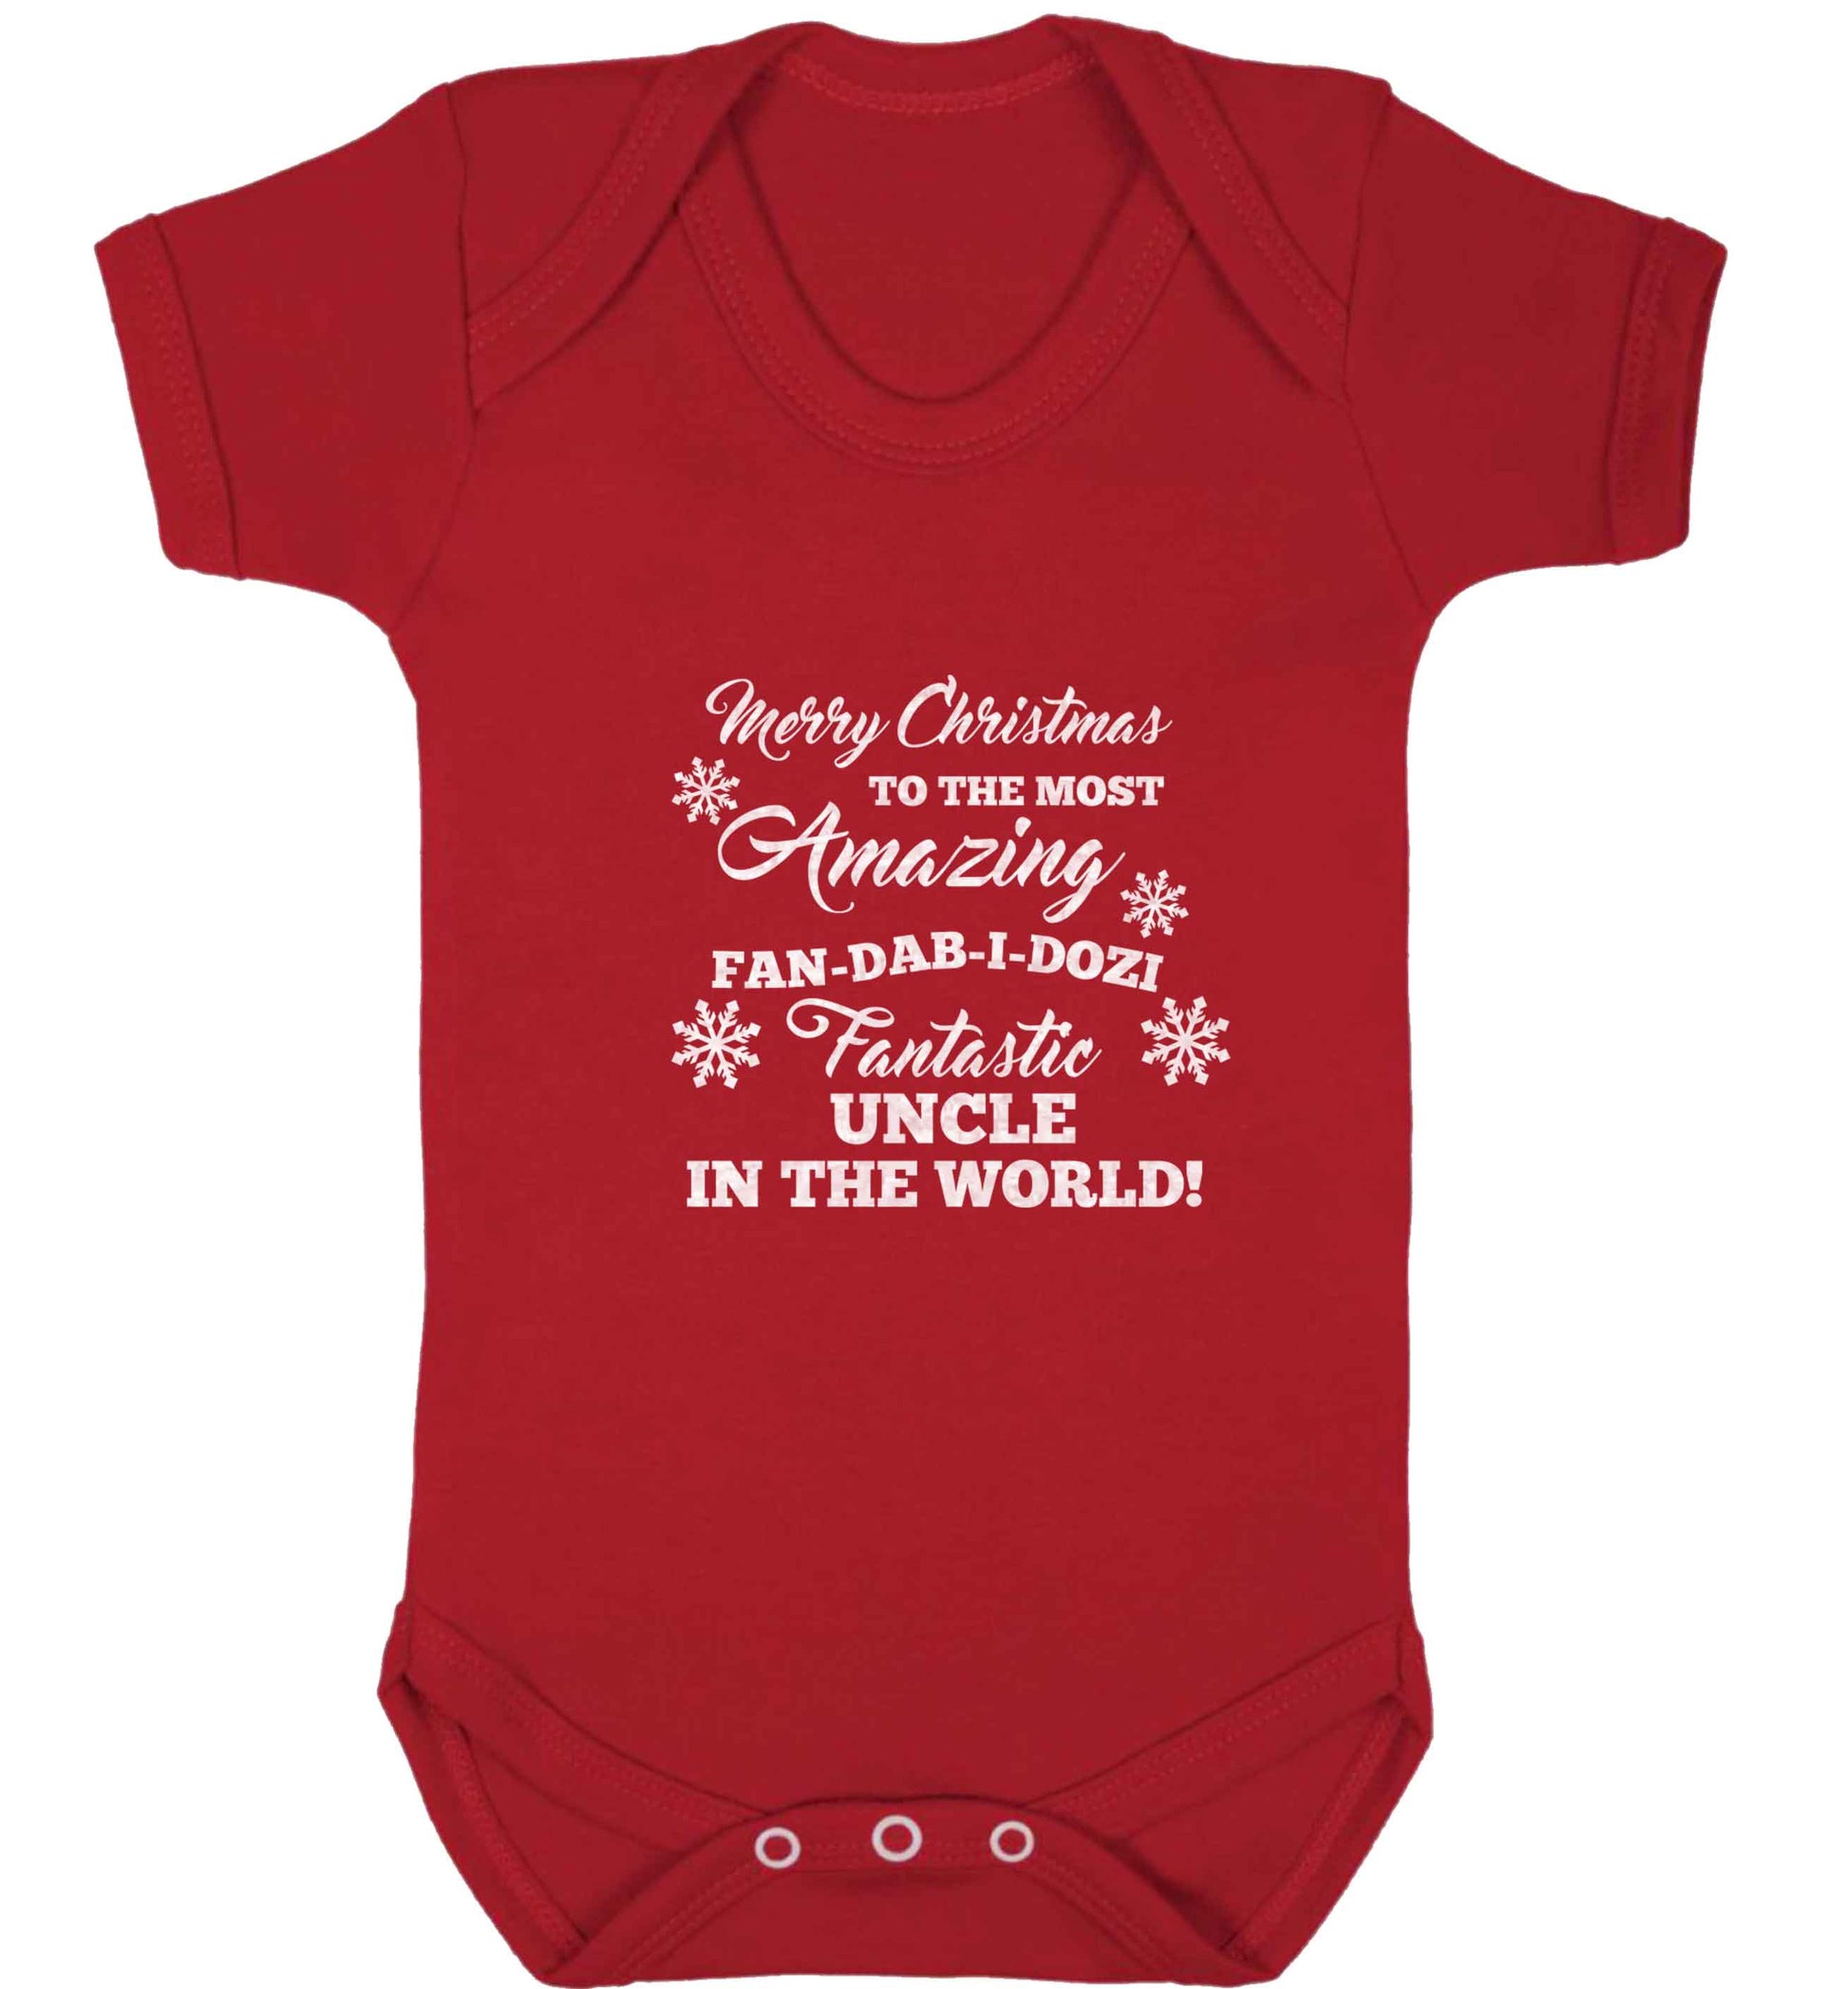 Merry Christmas to the most amazing fan-dab-i-dozi fantasic Uncle in the world baby vest red 18-24 months